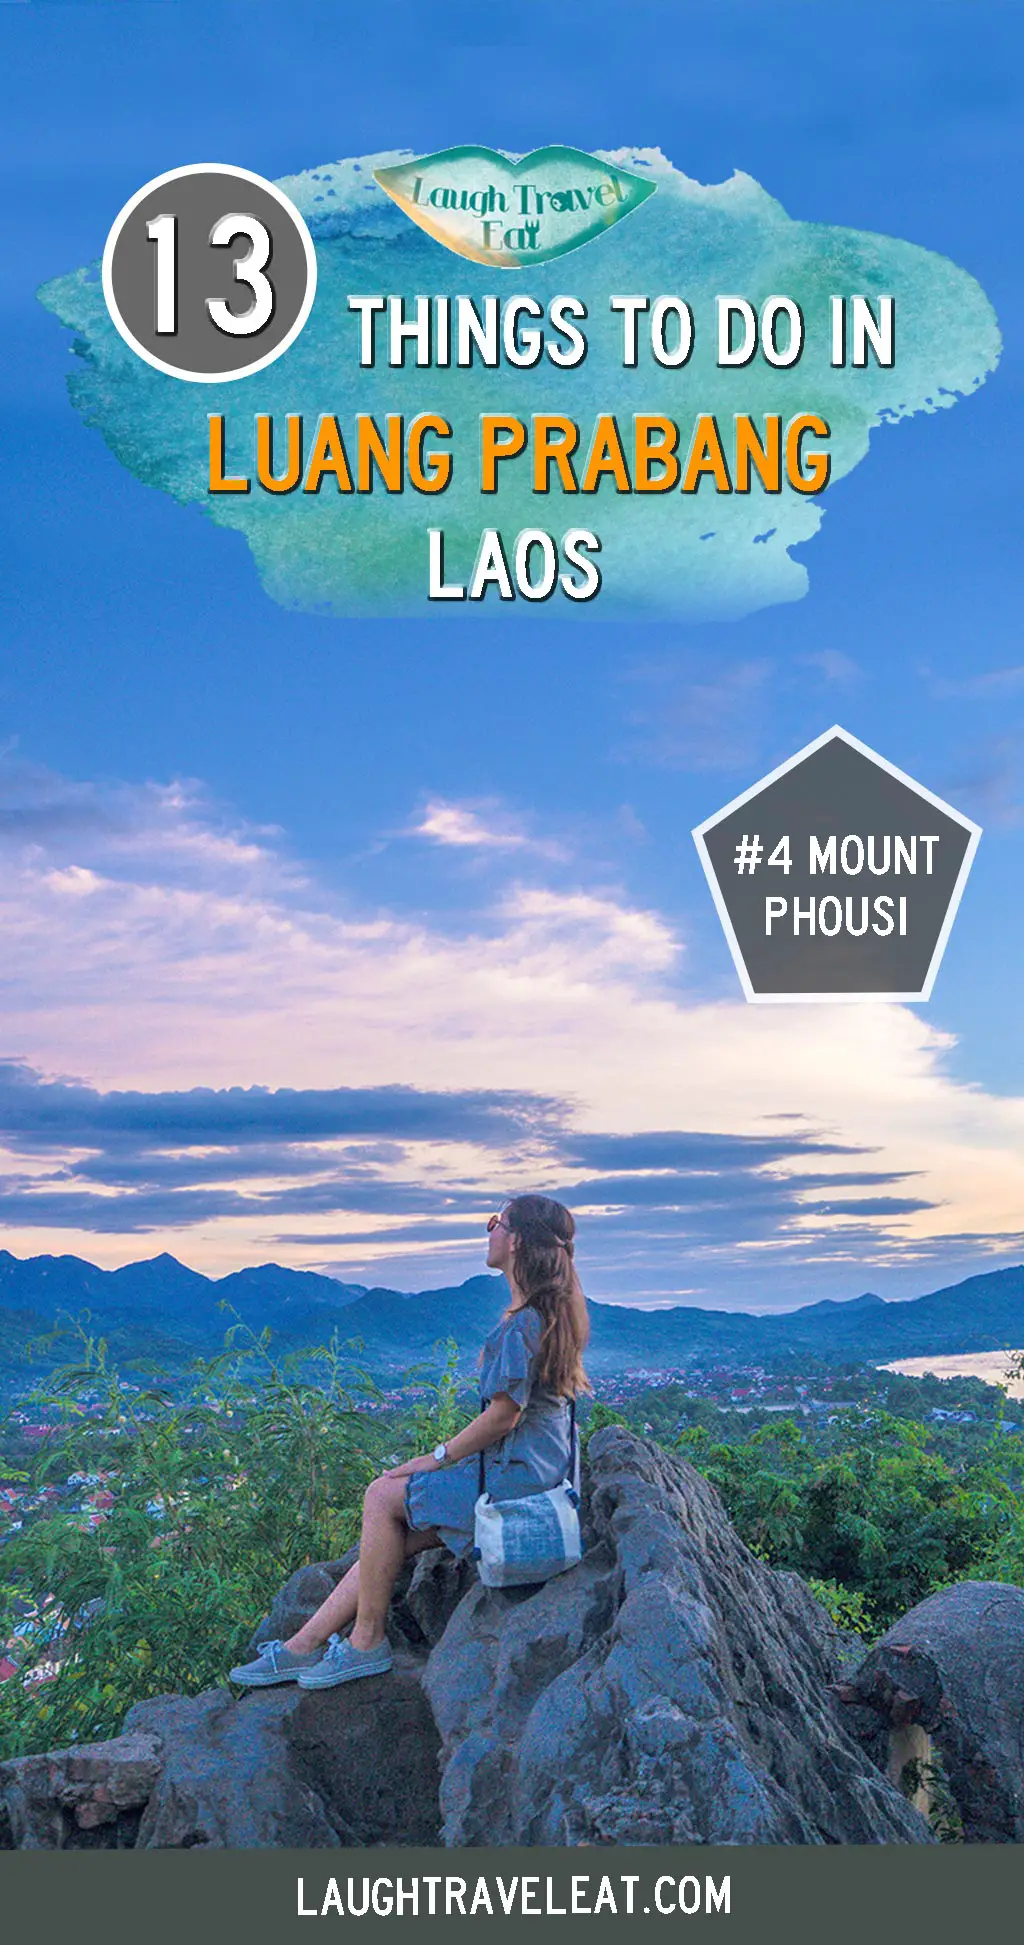 Heading to Luang Prabang? Here are 13 amazing things you can do in this northern Laos city from Kuang Si Waterfalls to temples #laos #luangprabang #mekong